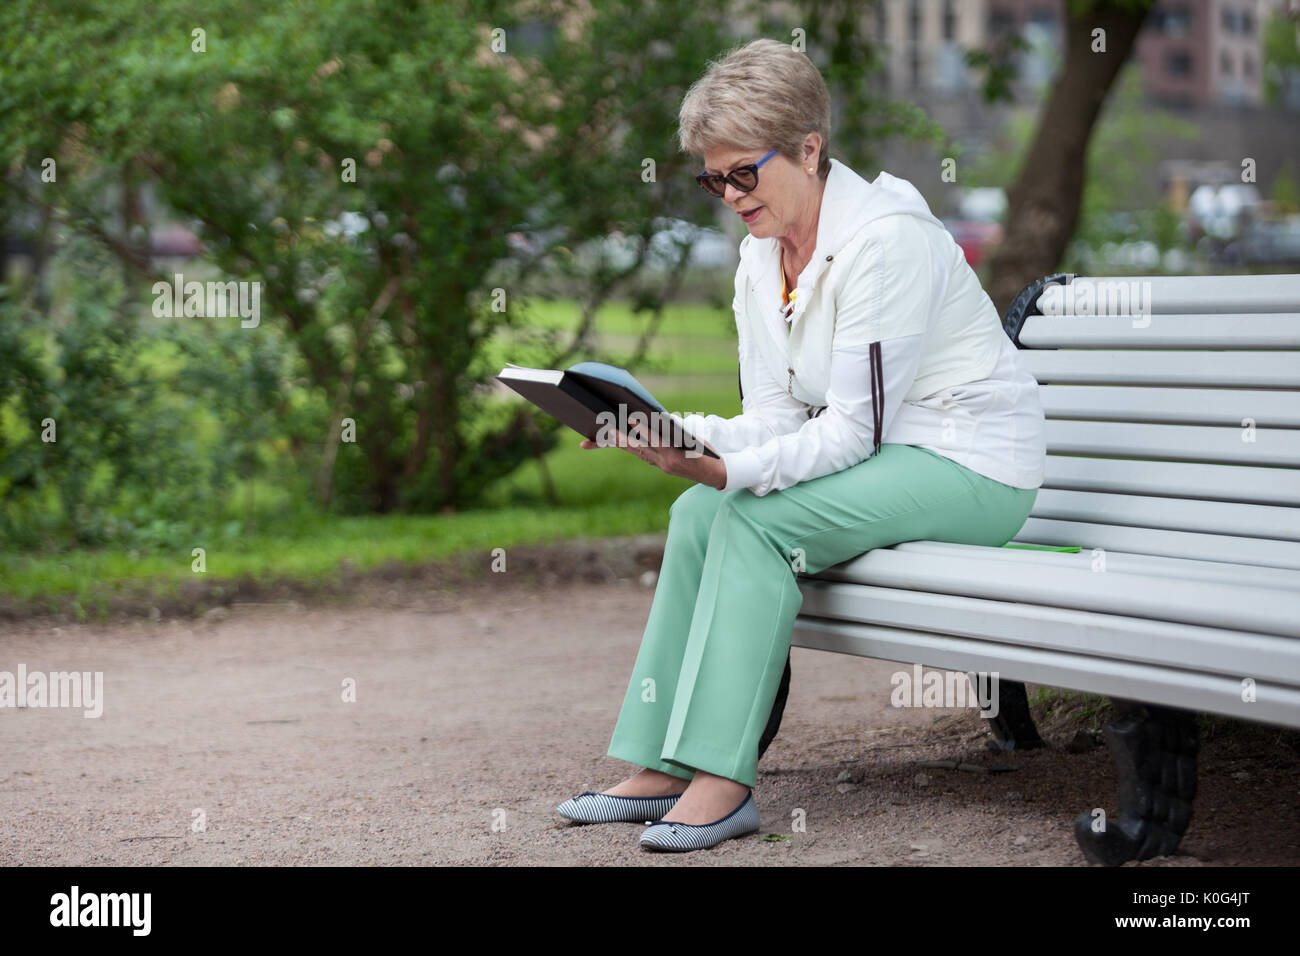 An elderly woman enthusiastically reading a book in the park on a bench, copy space Stock Photo